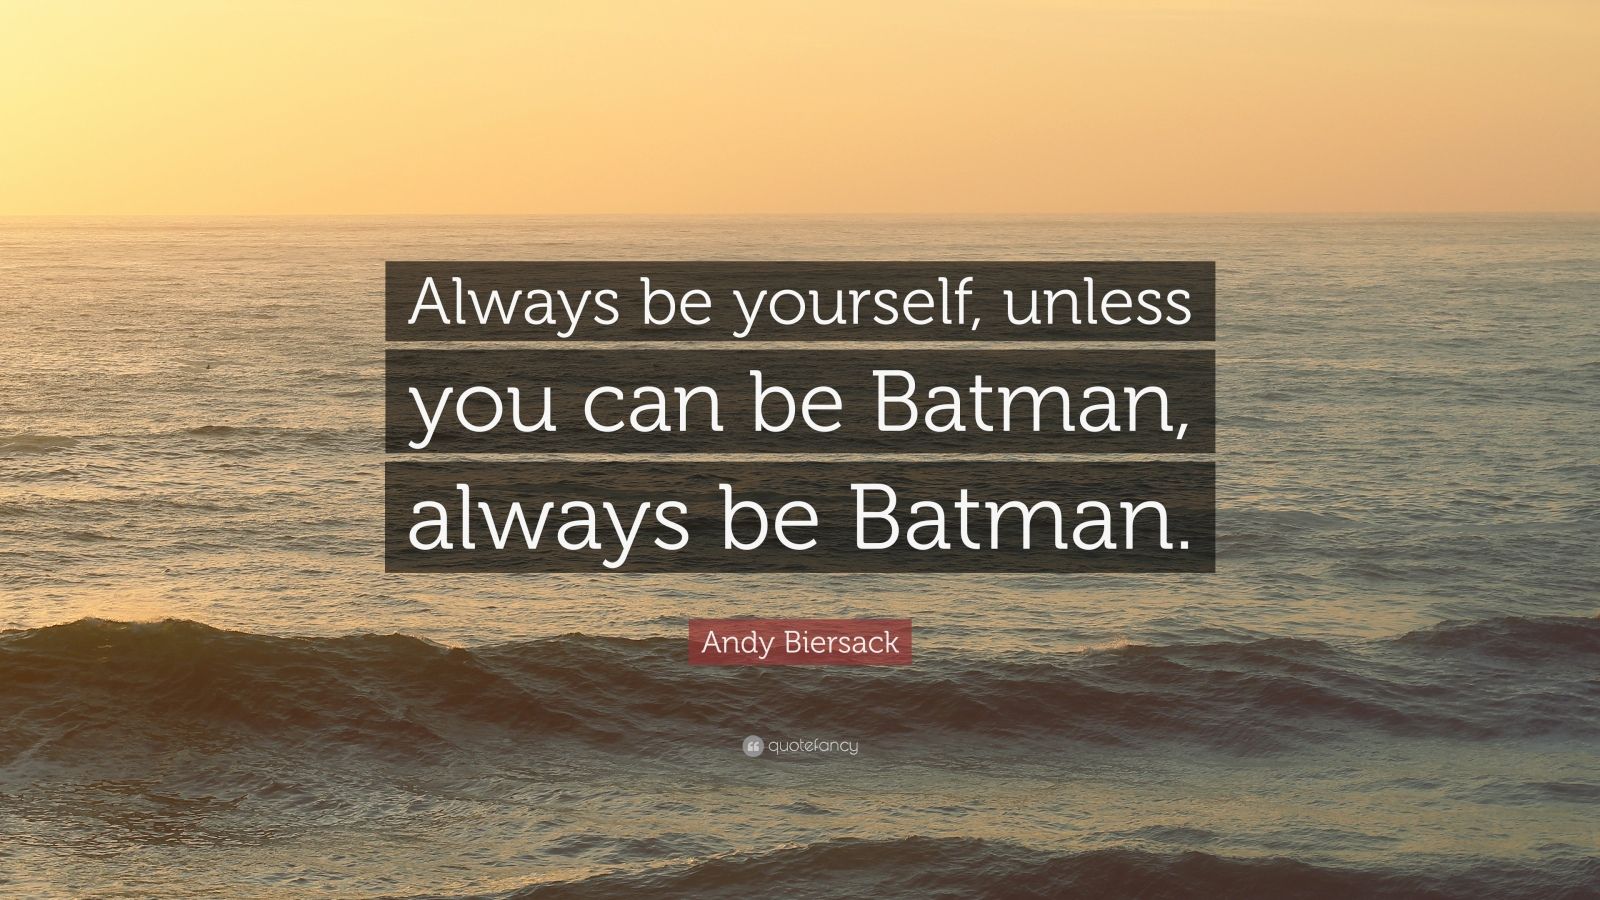 Andy Biersack Quote: "Always be yourself, unless you can ...